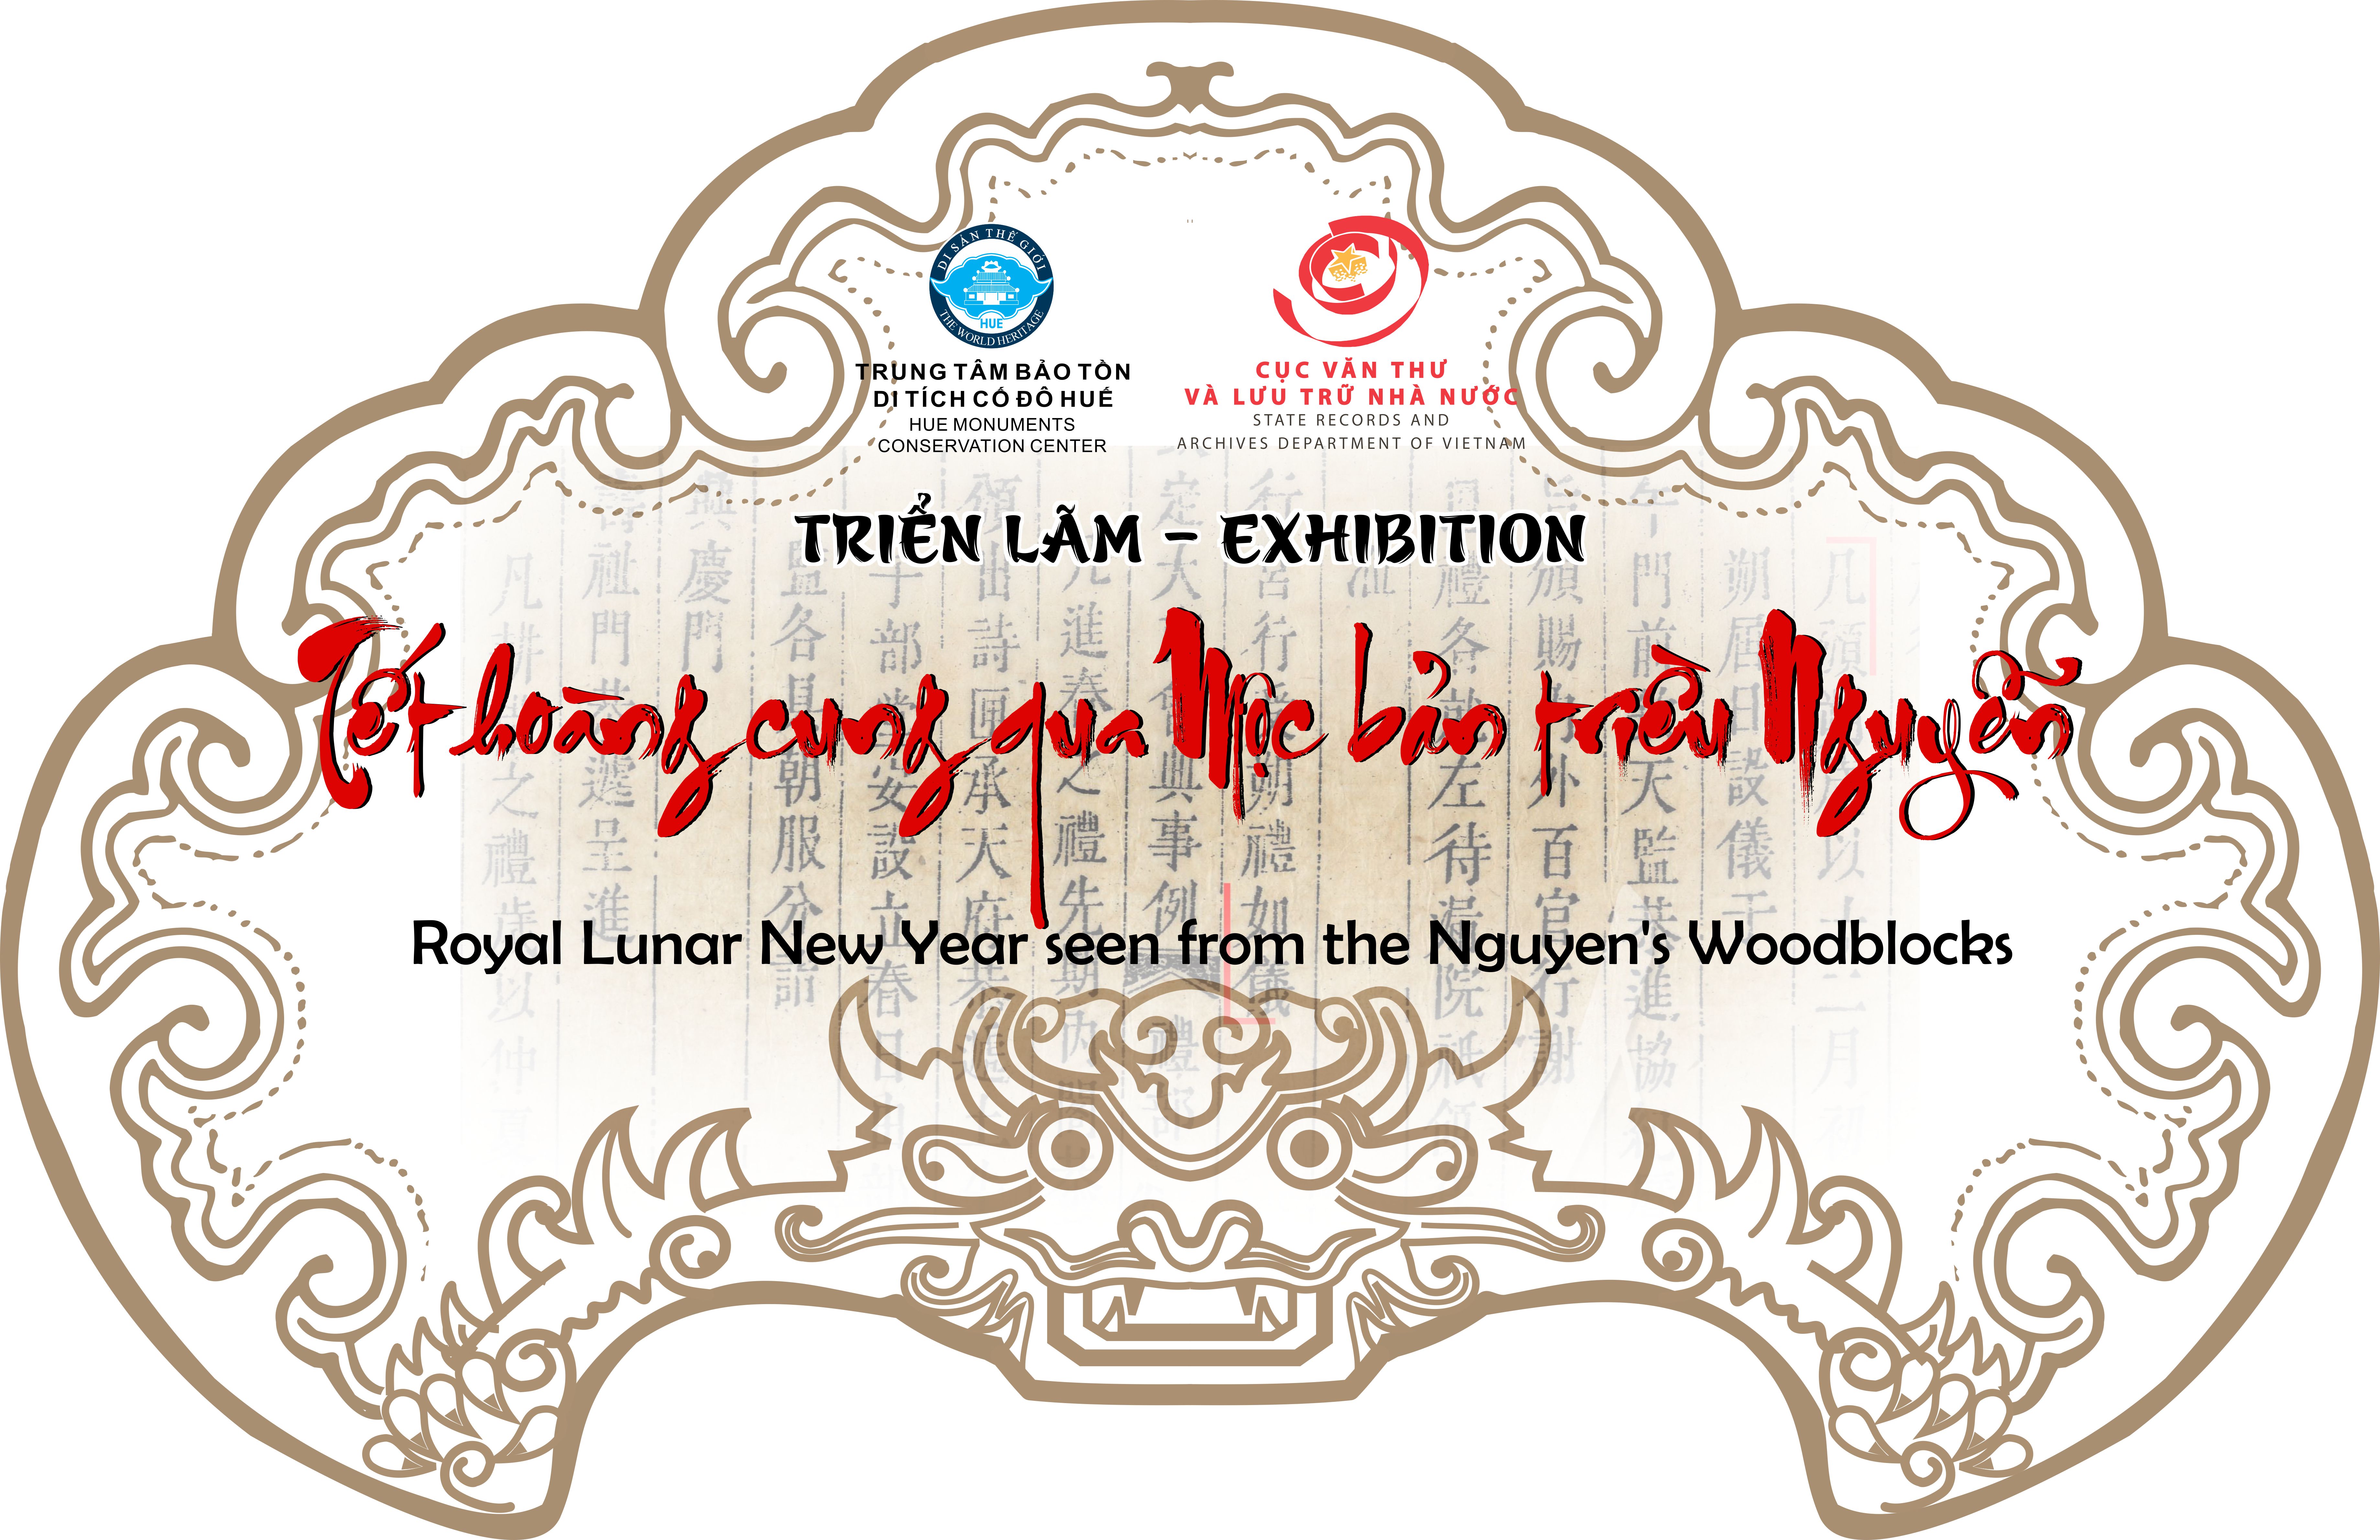 Exhibition “Royal Lunar New Year seen from the Nguyen’s Woodblocks”